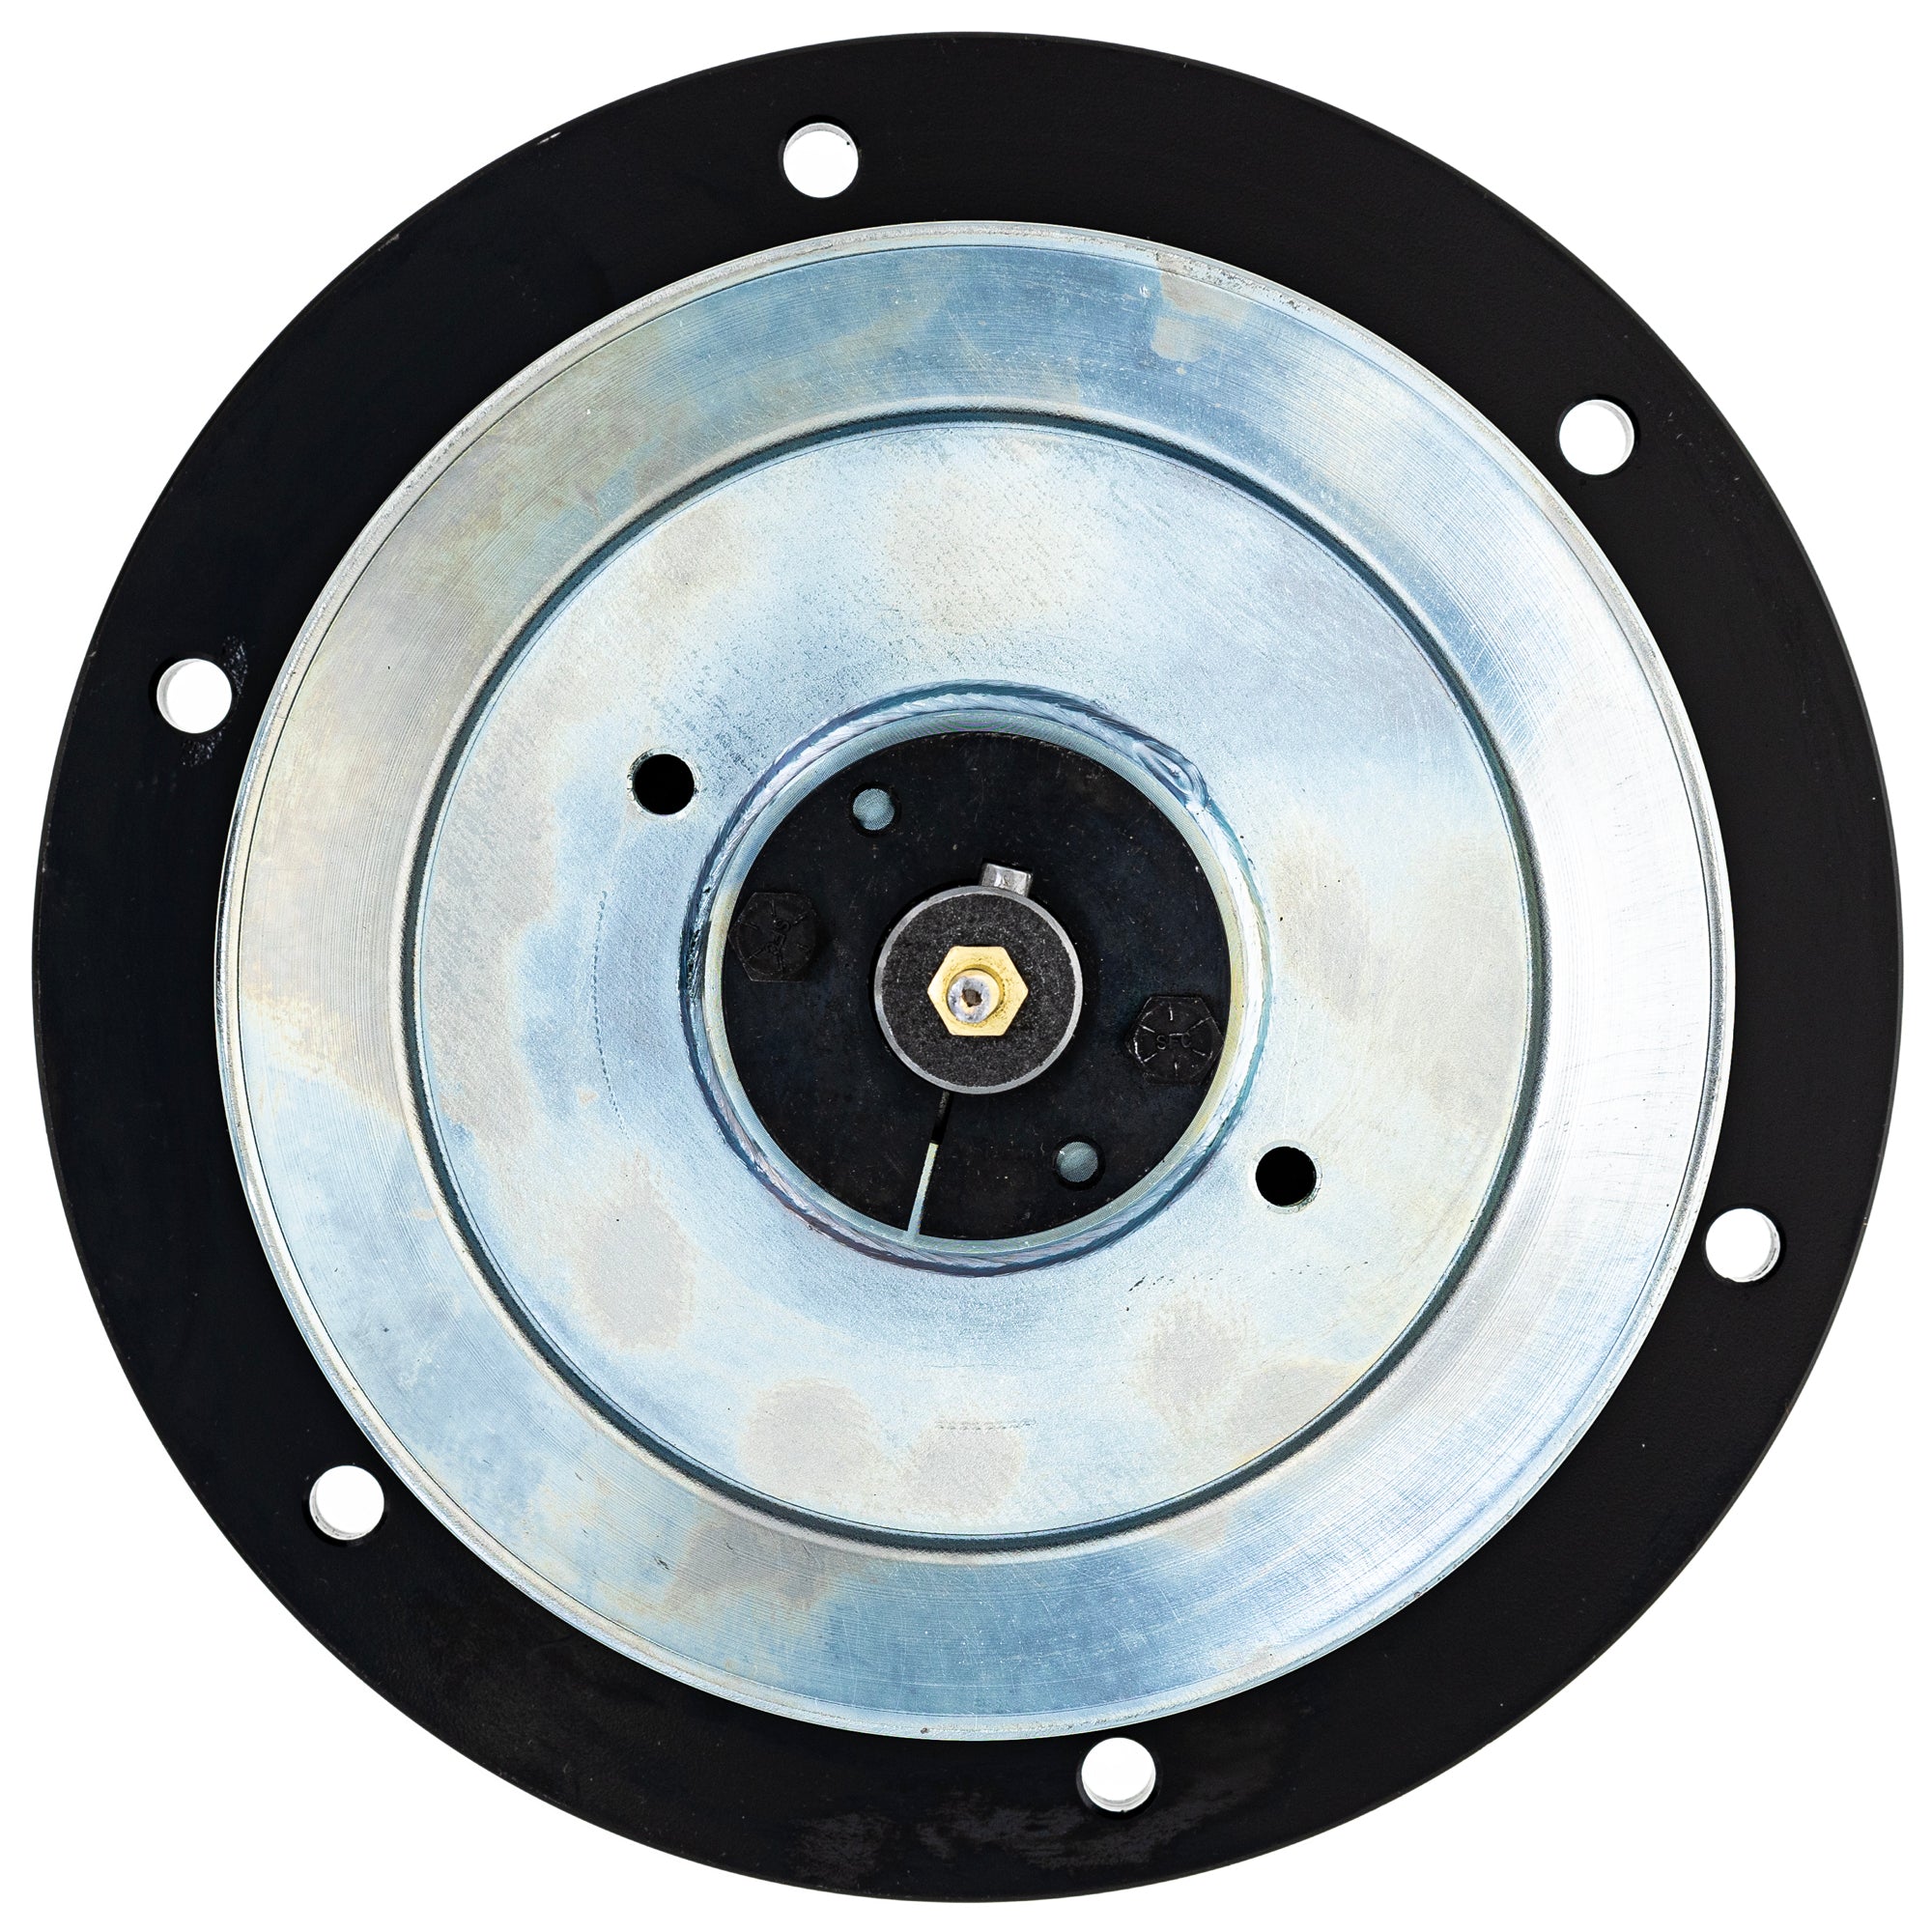 Mower Spindle For Ferris IS3200Z 5413009 5104528 84003242 72-Inch Deck